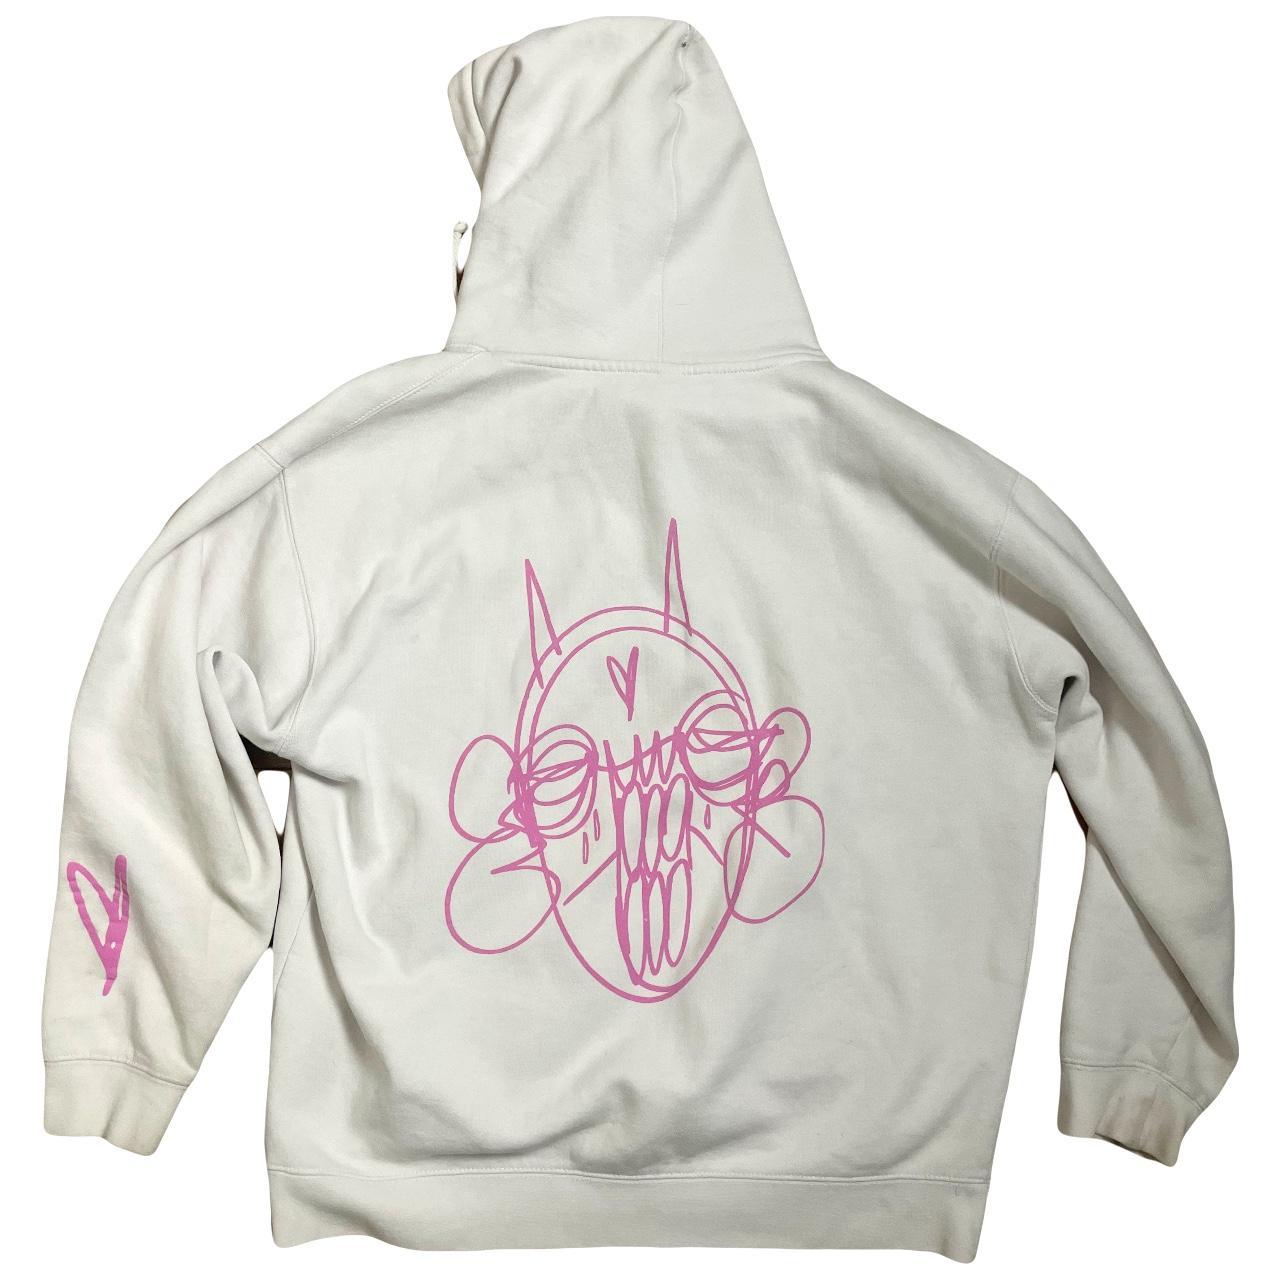 New York Filthy Men's White and Pink Hoodie (2)